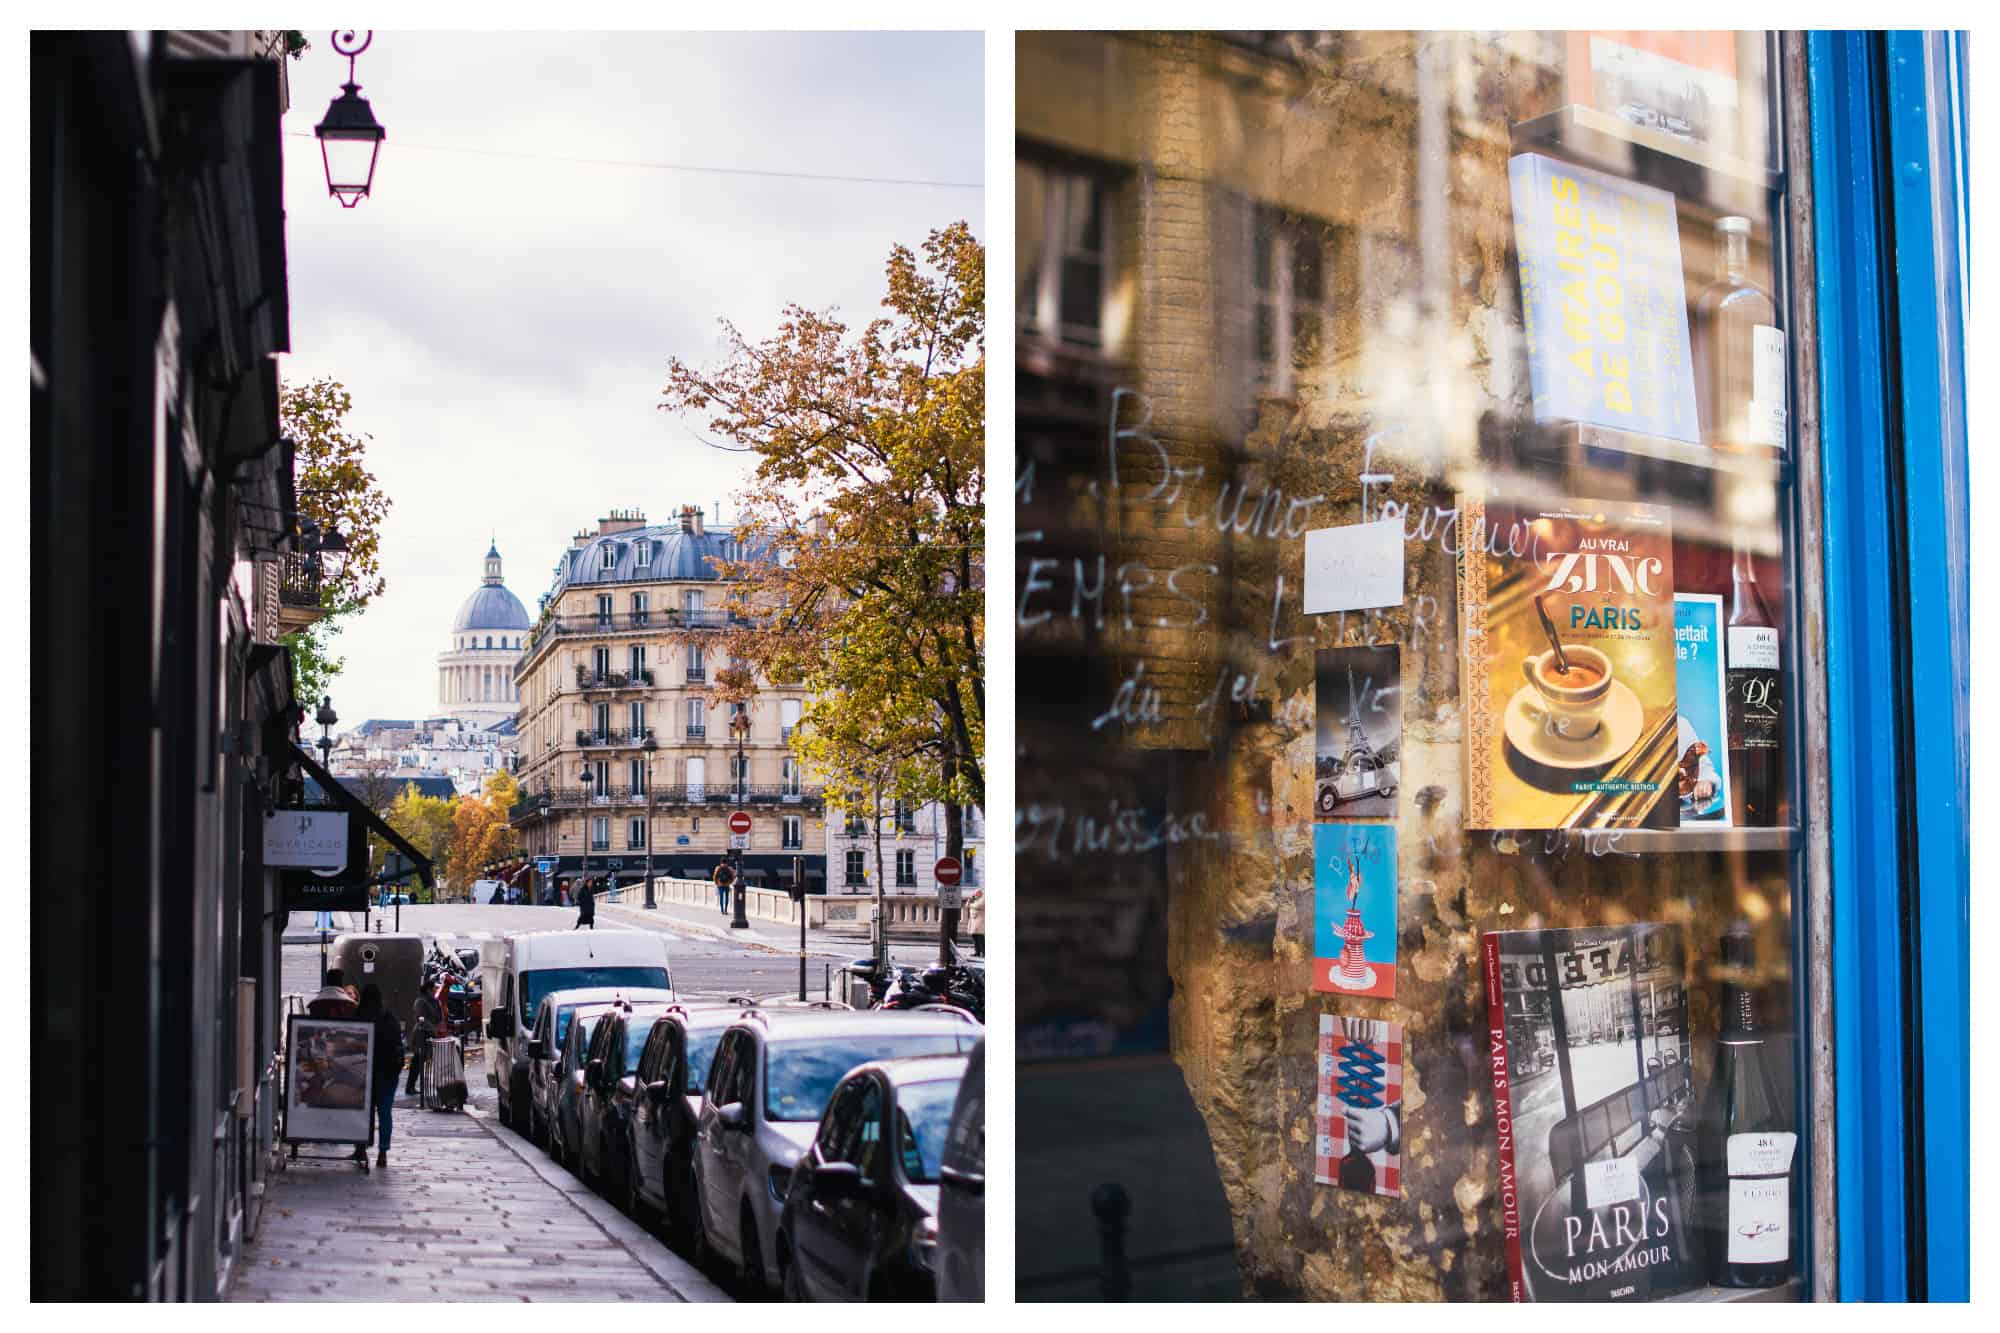 On left: an empty street on Île Saint Louis leads to a view of the Pantheon dome in Paris' Latin Quarter. On right: Books about Paris line a beautiful blue-trimmed store window.